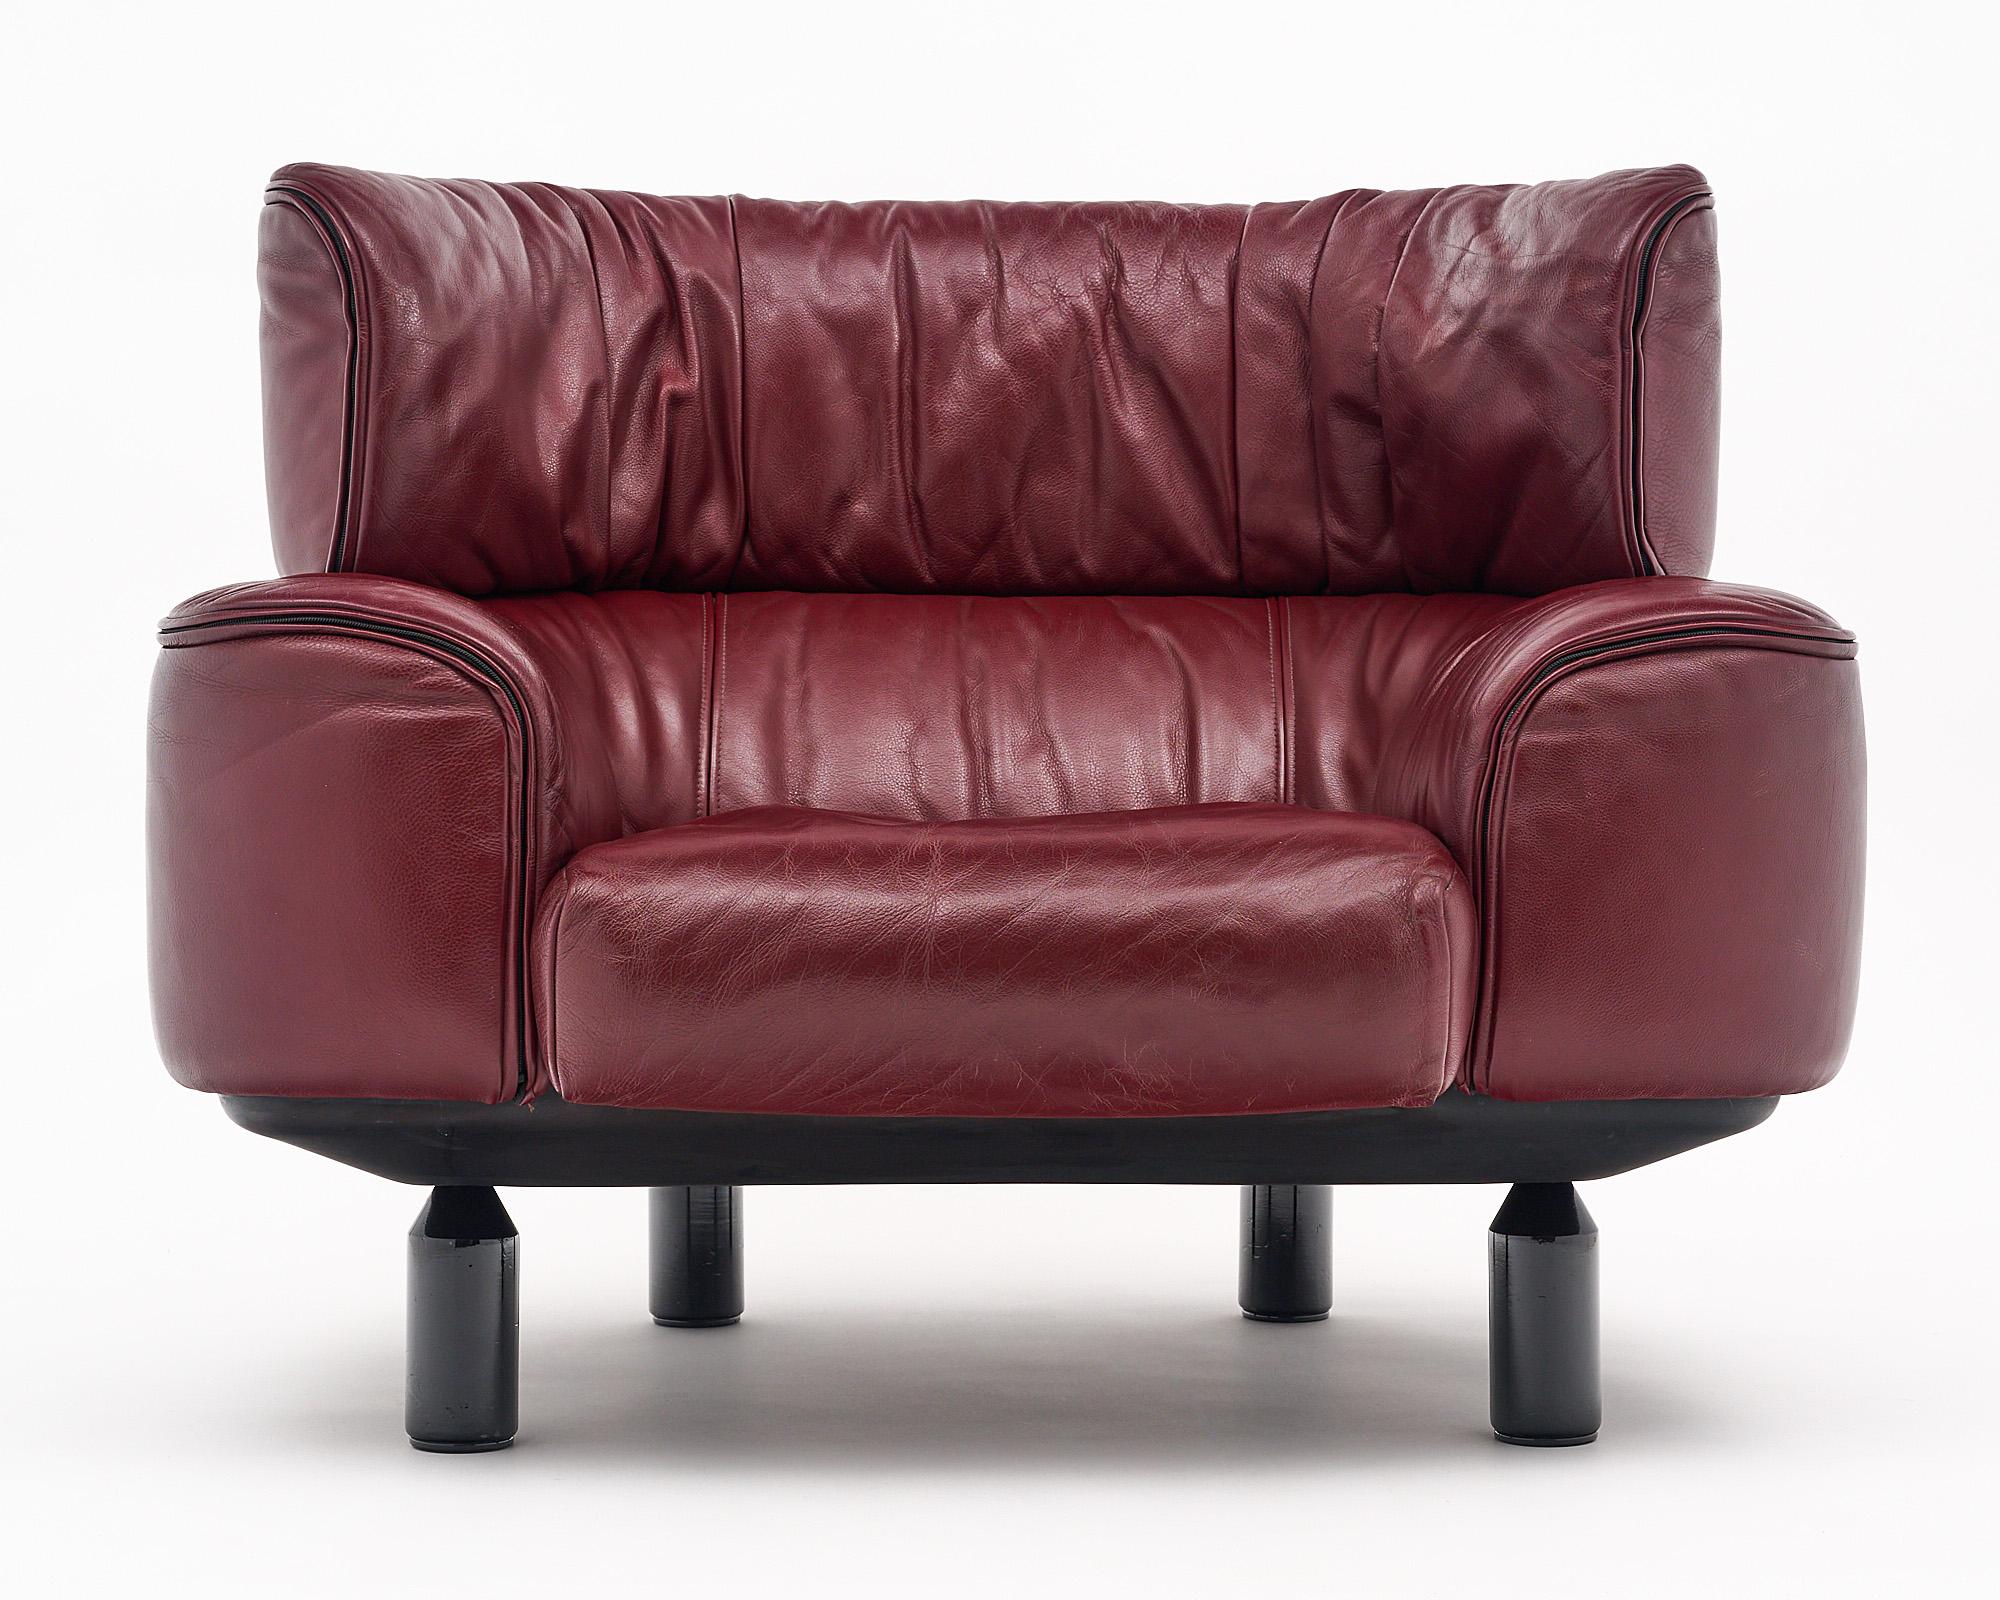 Pair of armchairs designed by Gianfranco Frattini for Cassina. This pair is made with red leather and has the Cassina signature on the backside of the seat pillows. We love the comfort; size; and style of this pair.